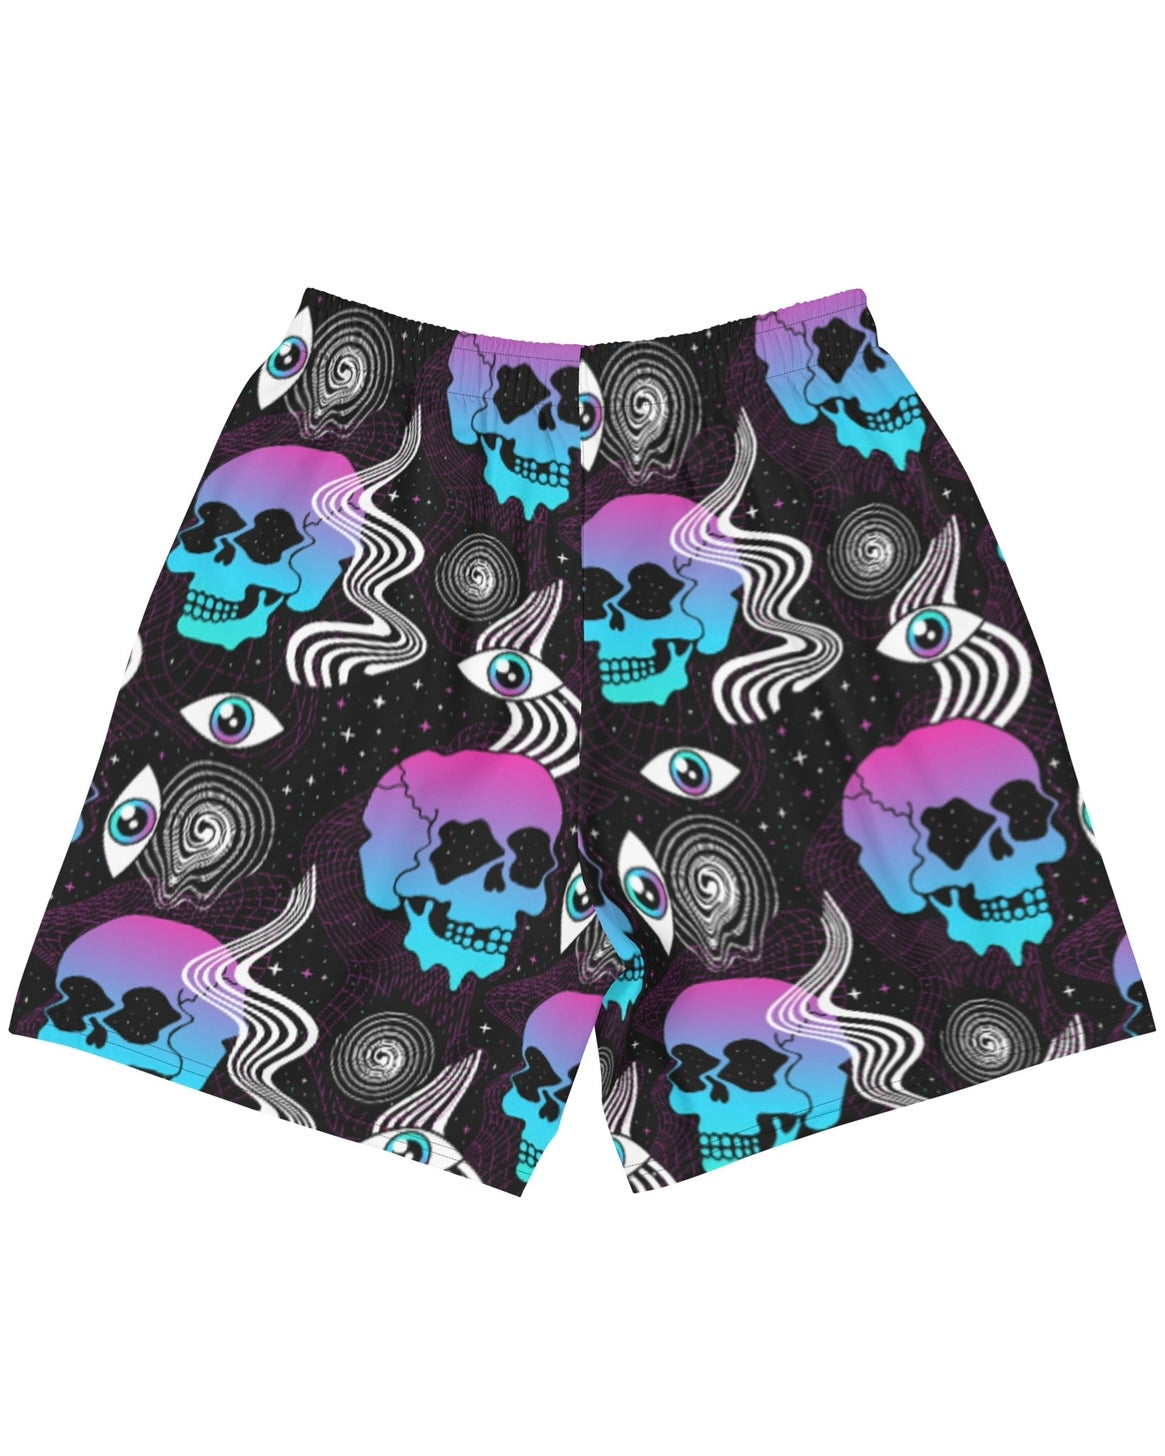 Ego Death Recycled Athletic Shorts, Athletic Shorts, - One Stop Rave